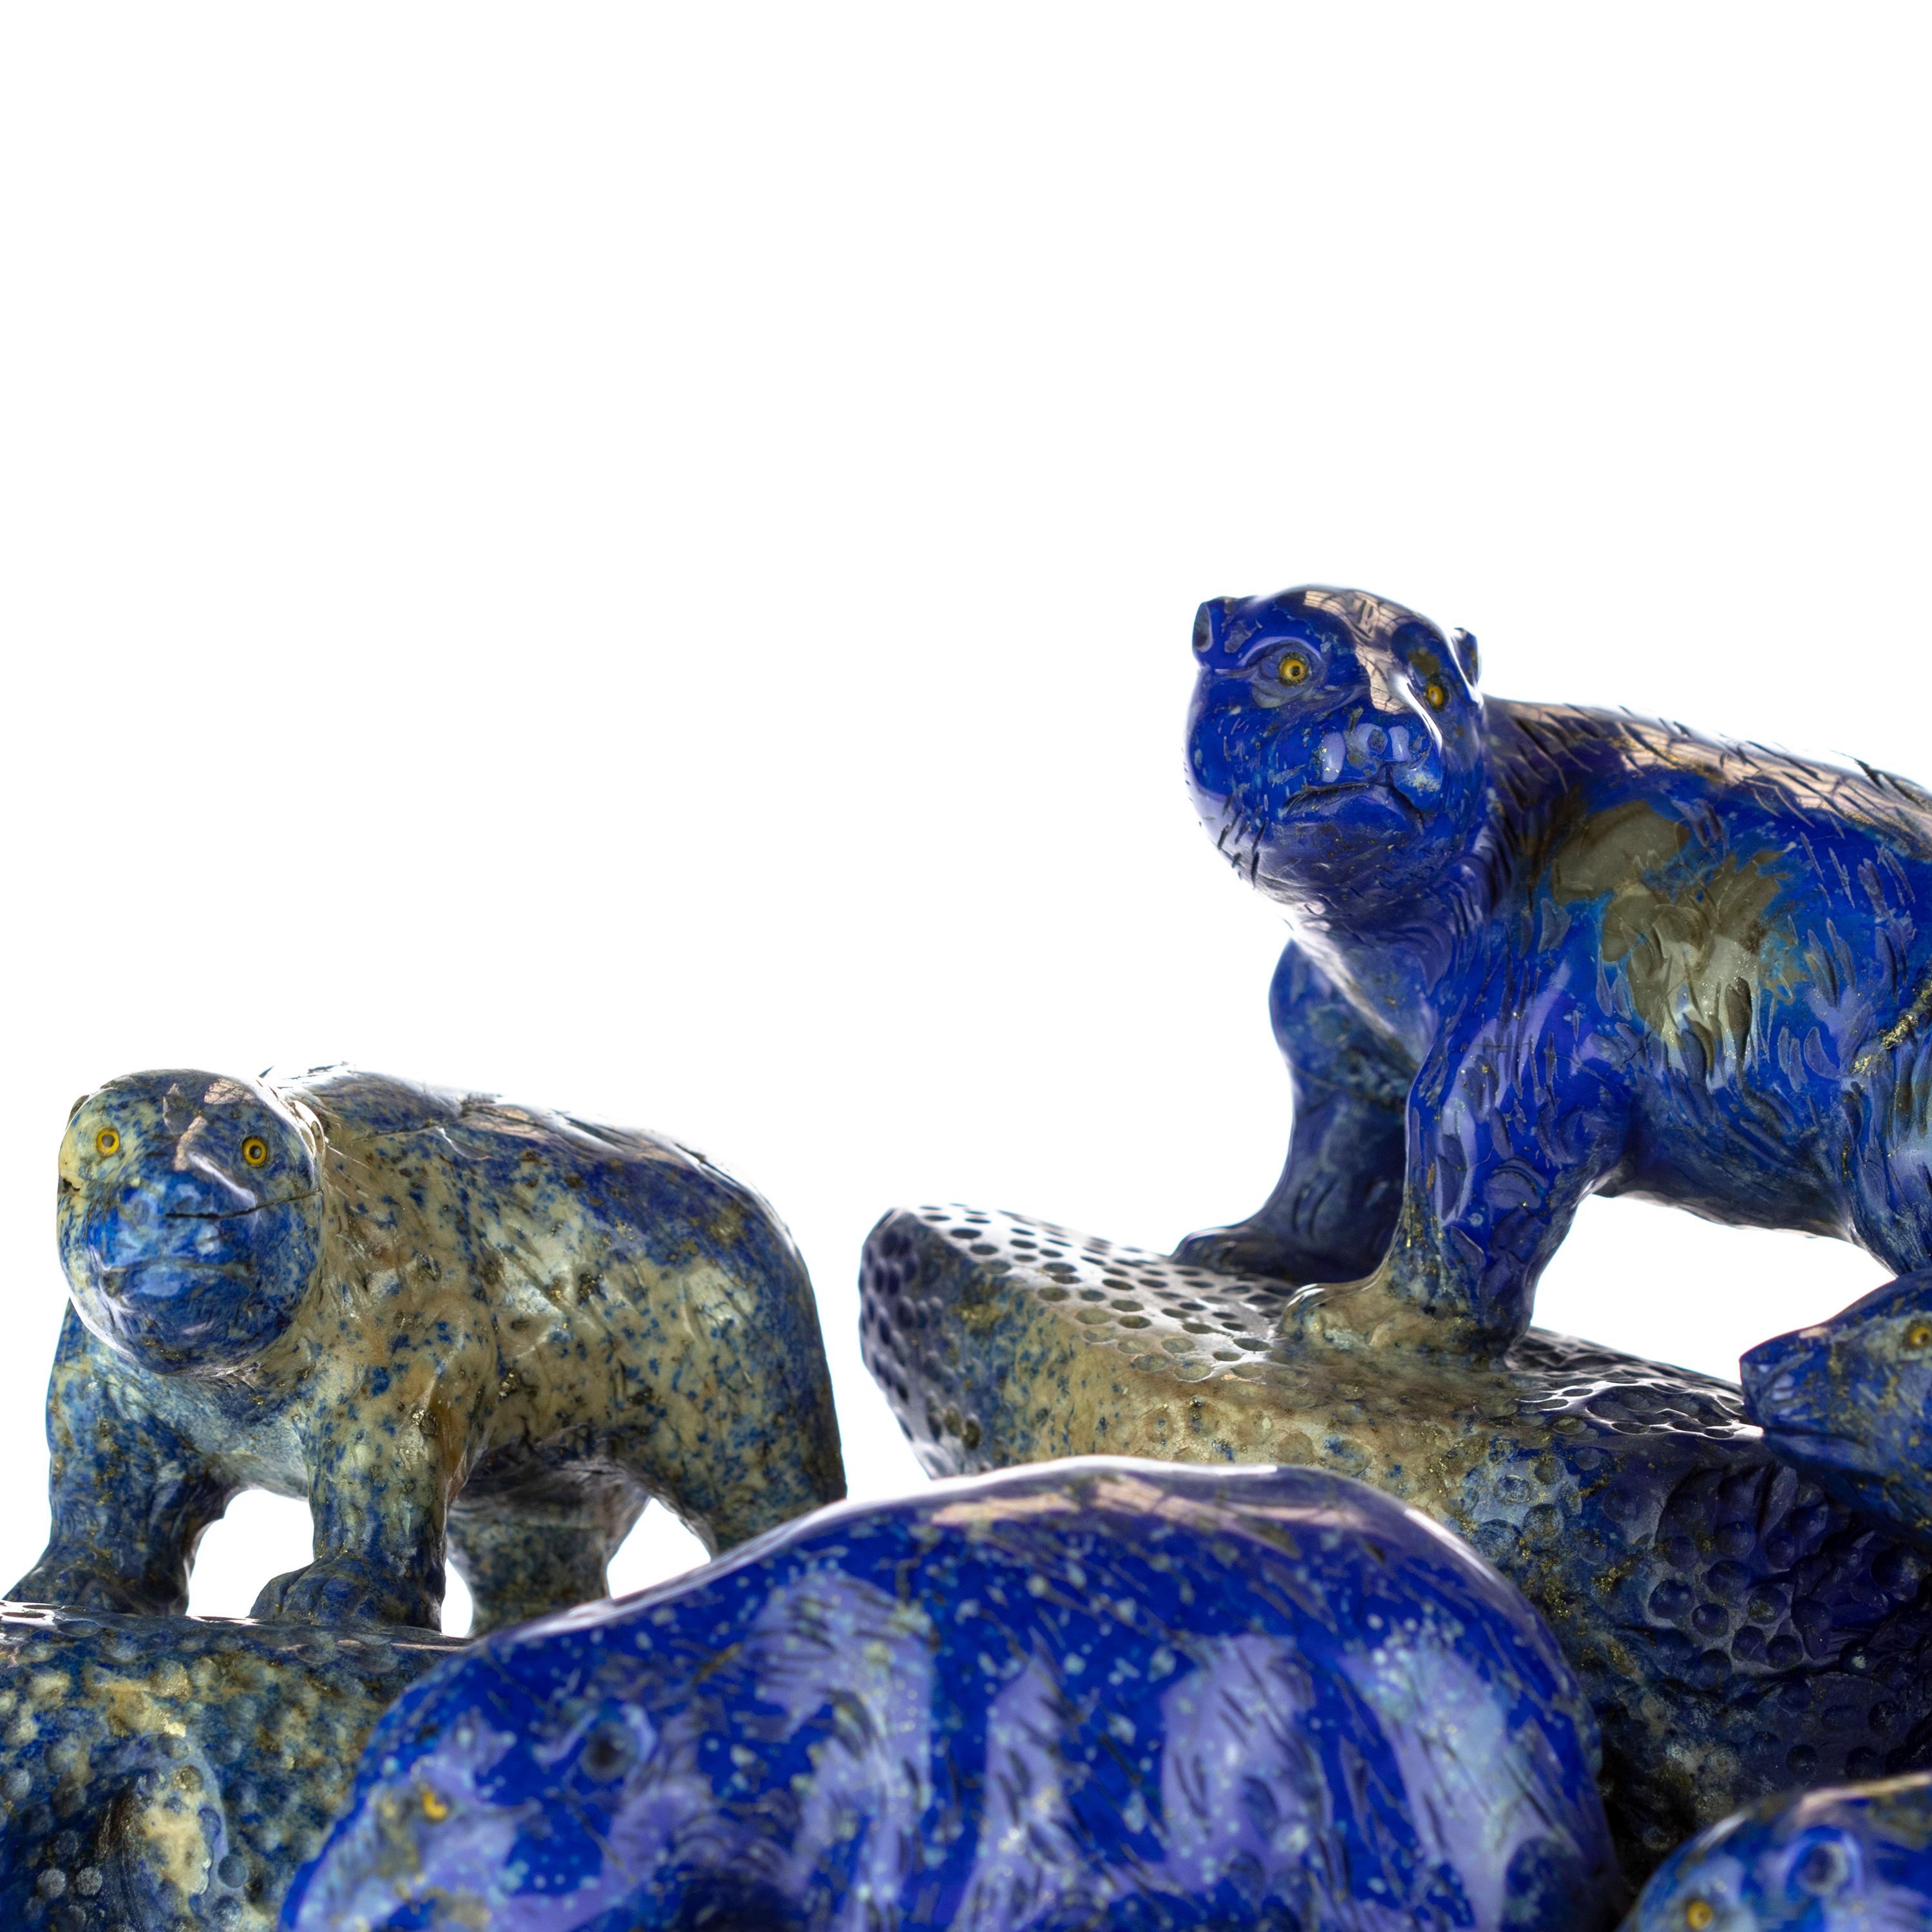 Late 20th Century Lapis Lazuli Blue Bears Family Carved Animal Artisanal Eastern Statue Sculpture For Sale